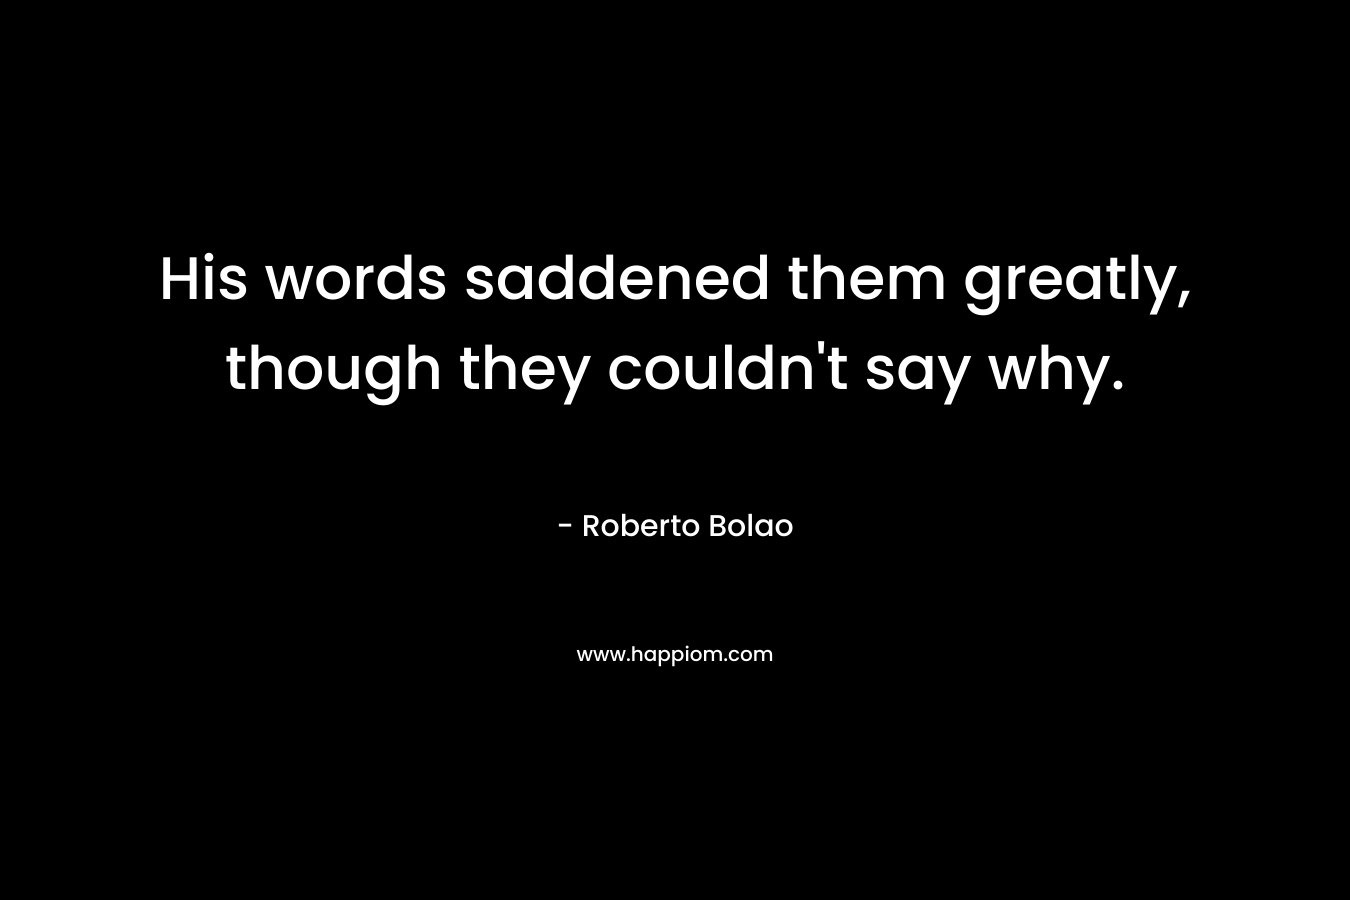 His words saddened them greatly, though they couldn’t say why. – Roberto Bolao